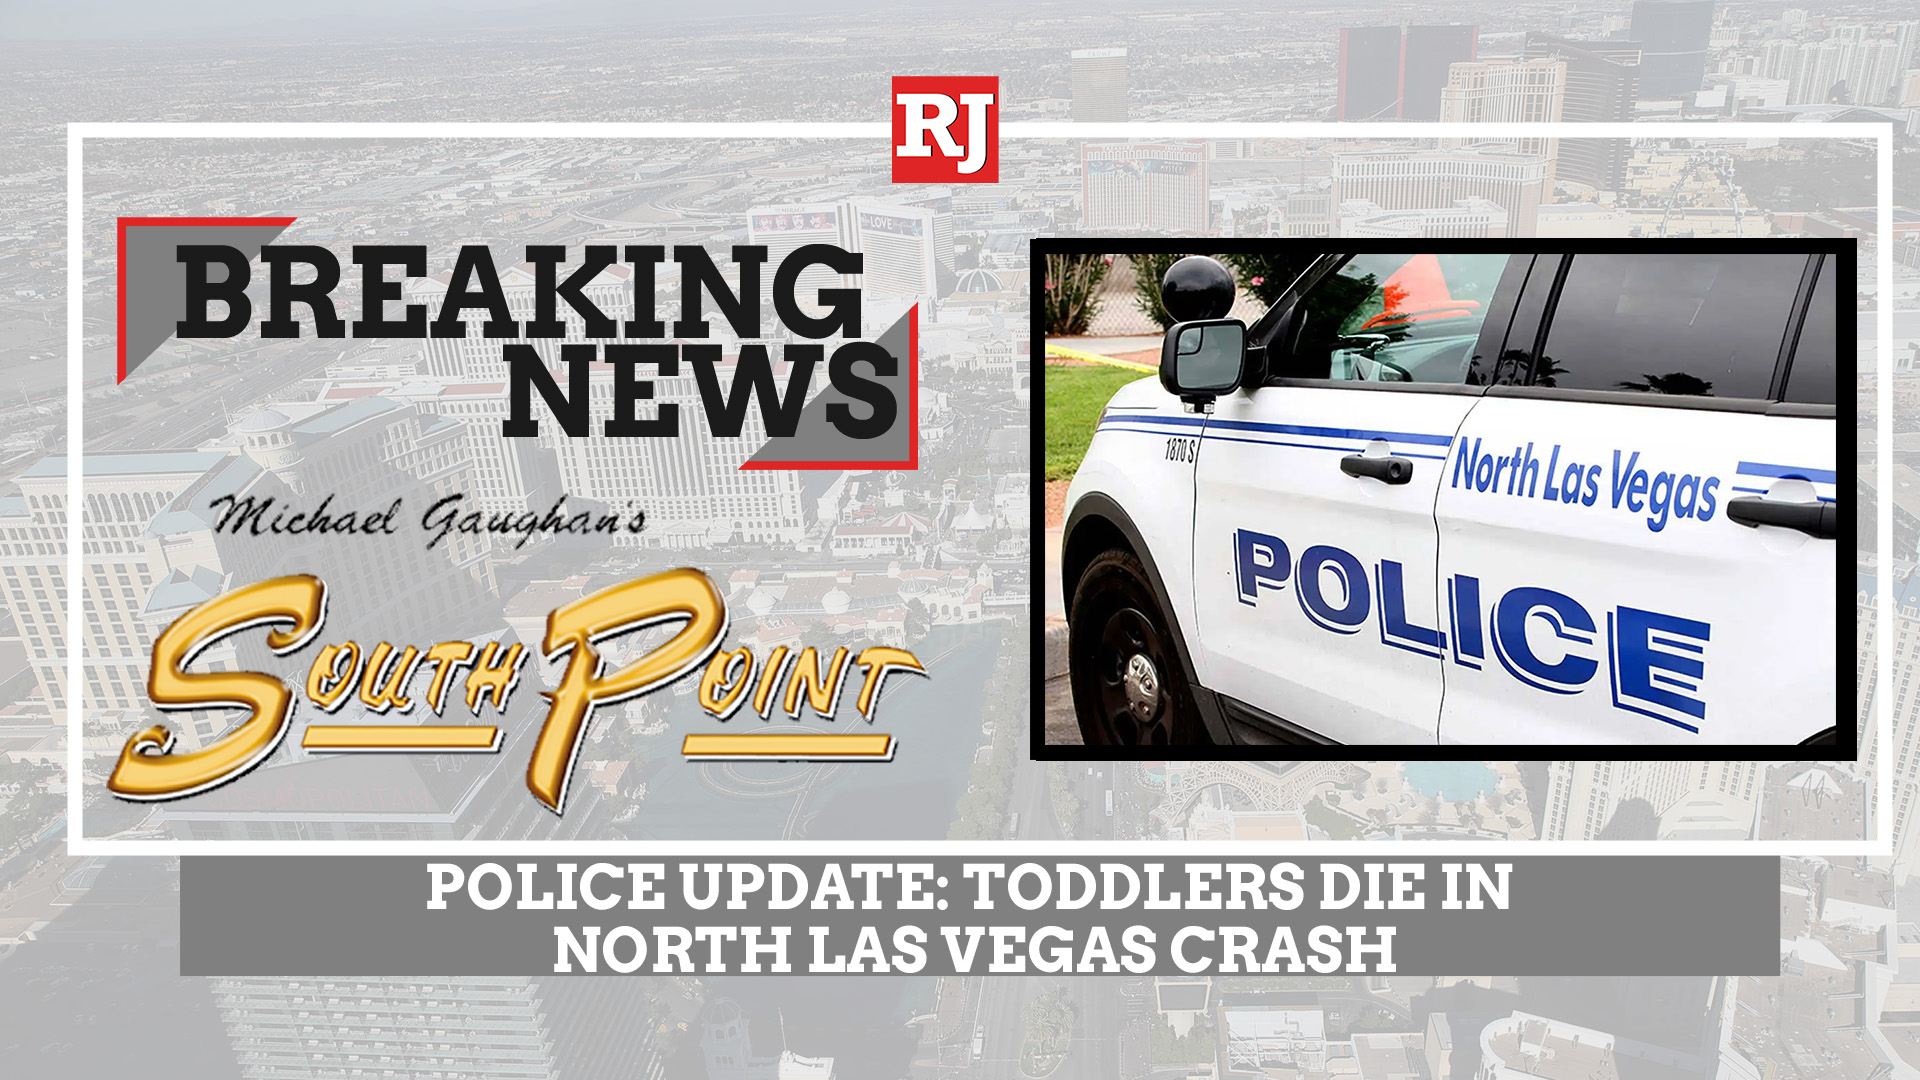 NLV police give update on crash that killed 2 toddlers